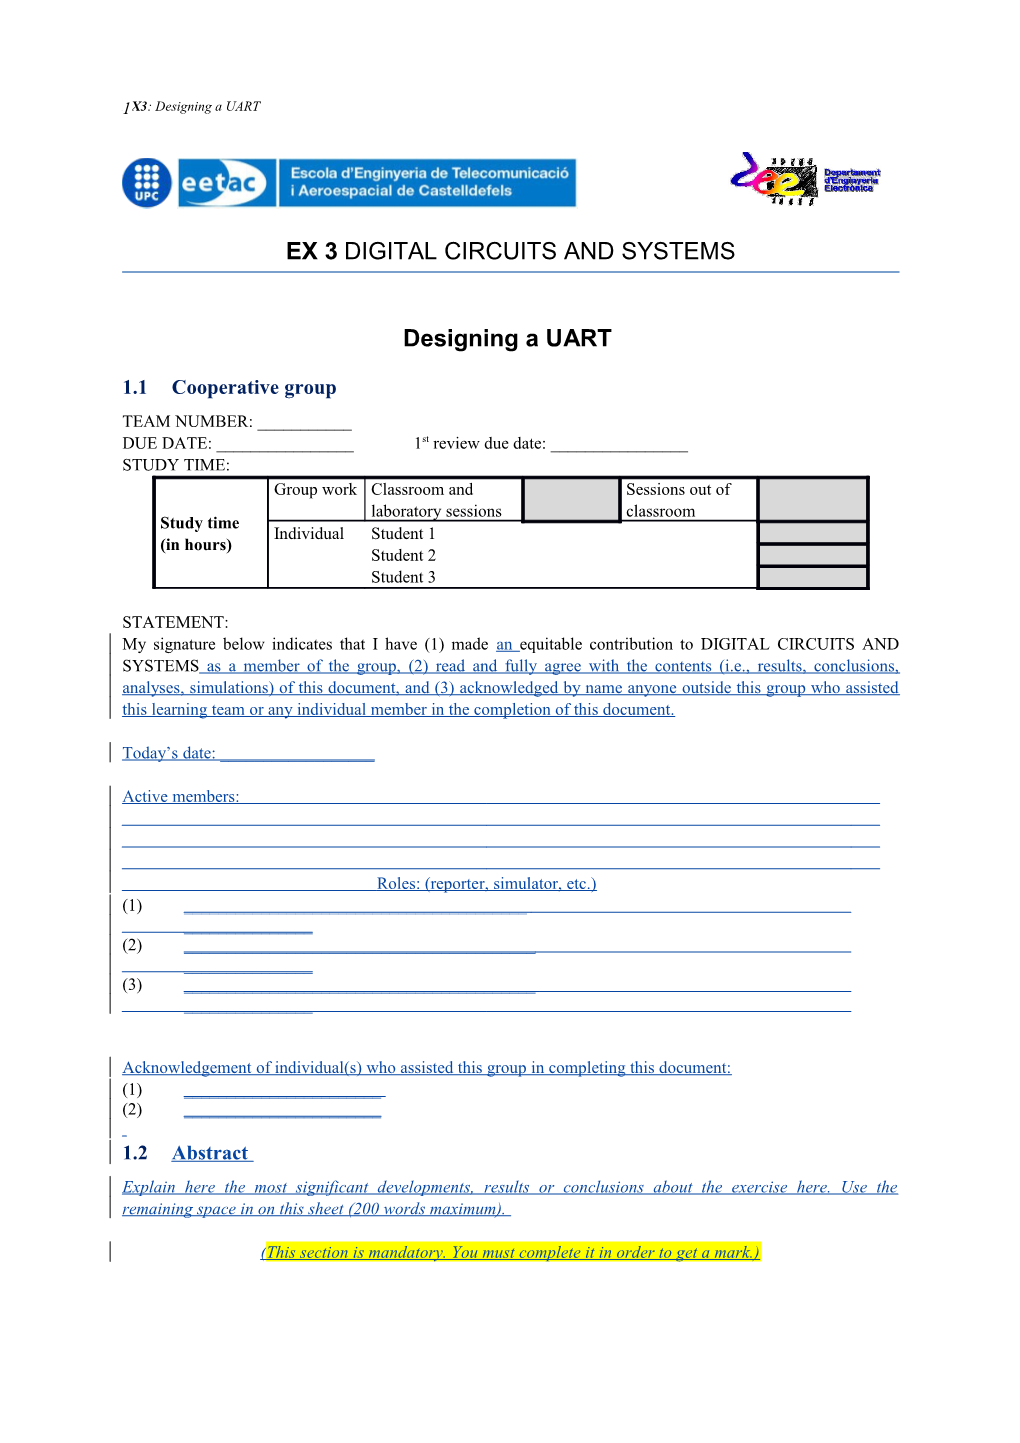 Ex 3Digital Circuits and Systems